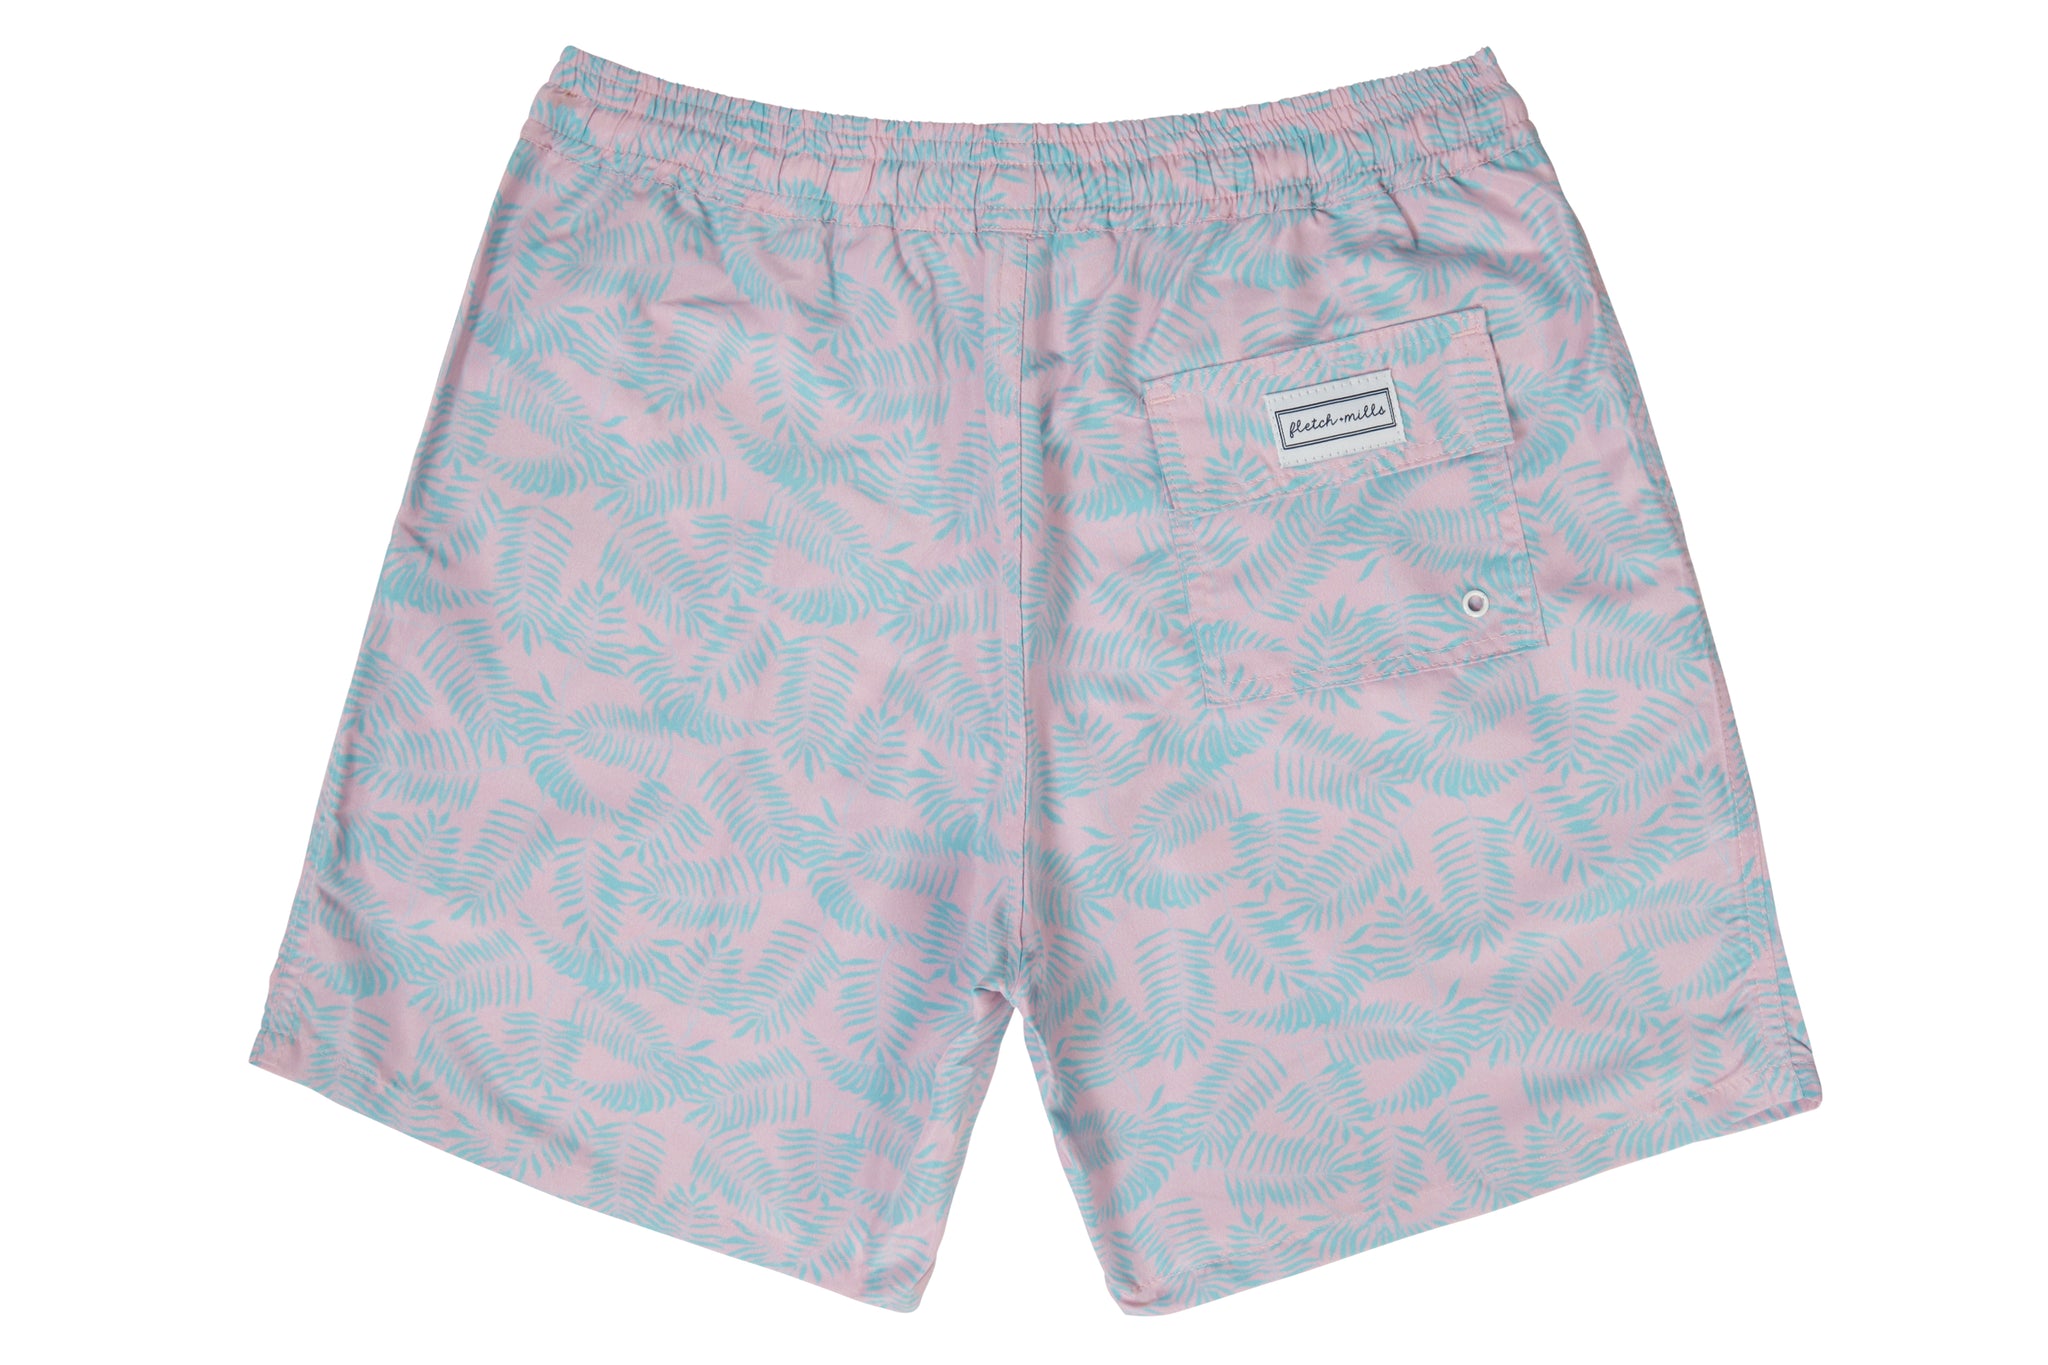 Mens - Pink and Turquoise Palm Leaf Print Swim Shorts